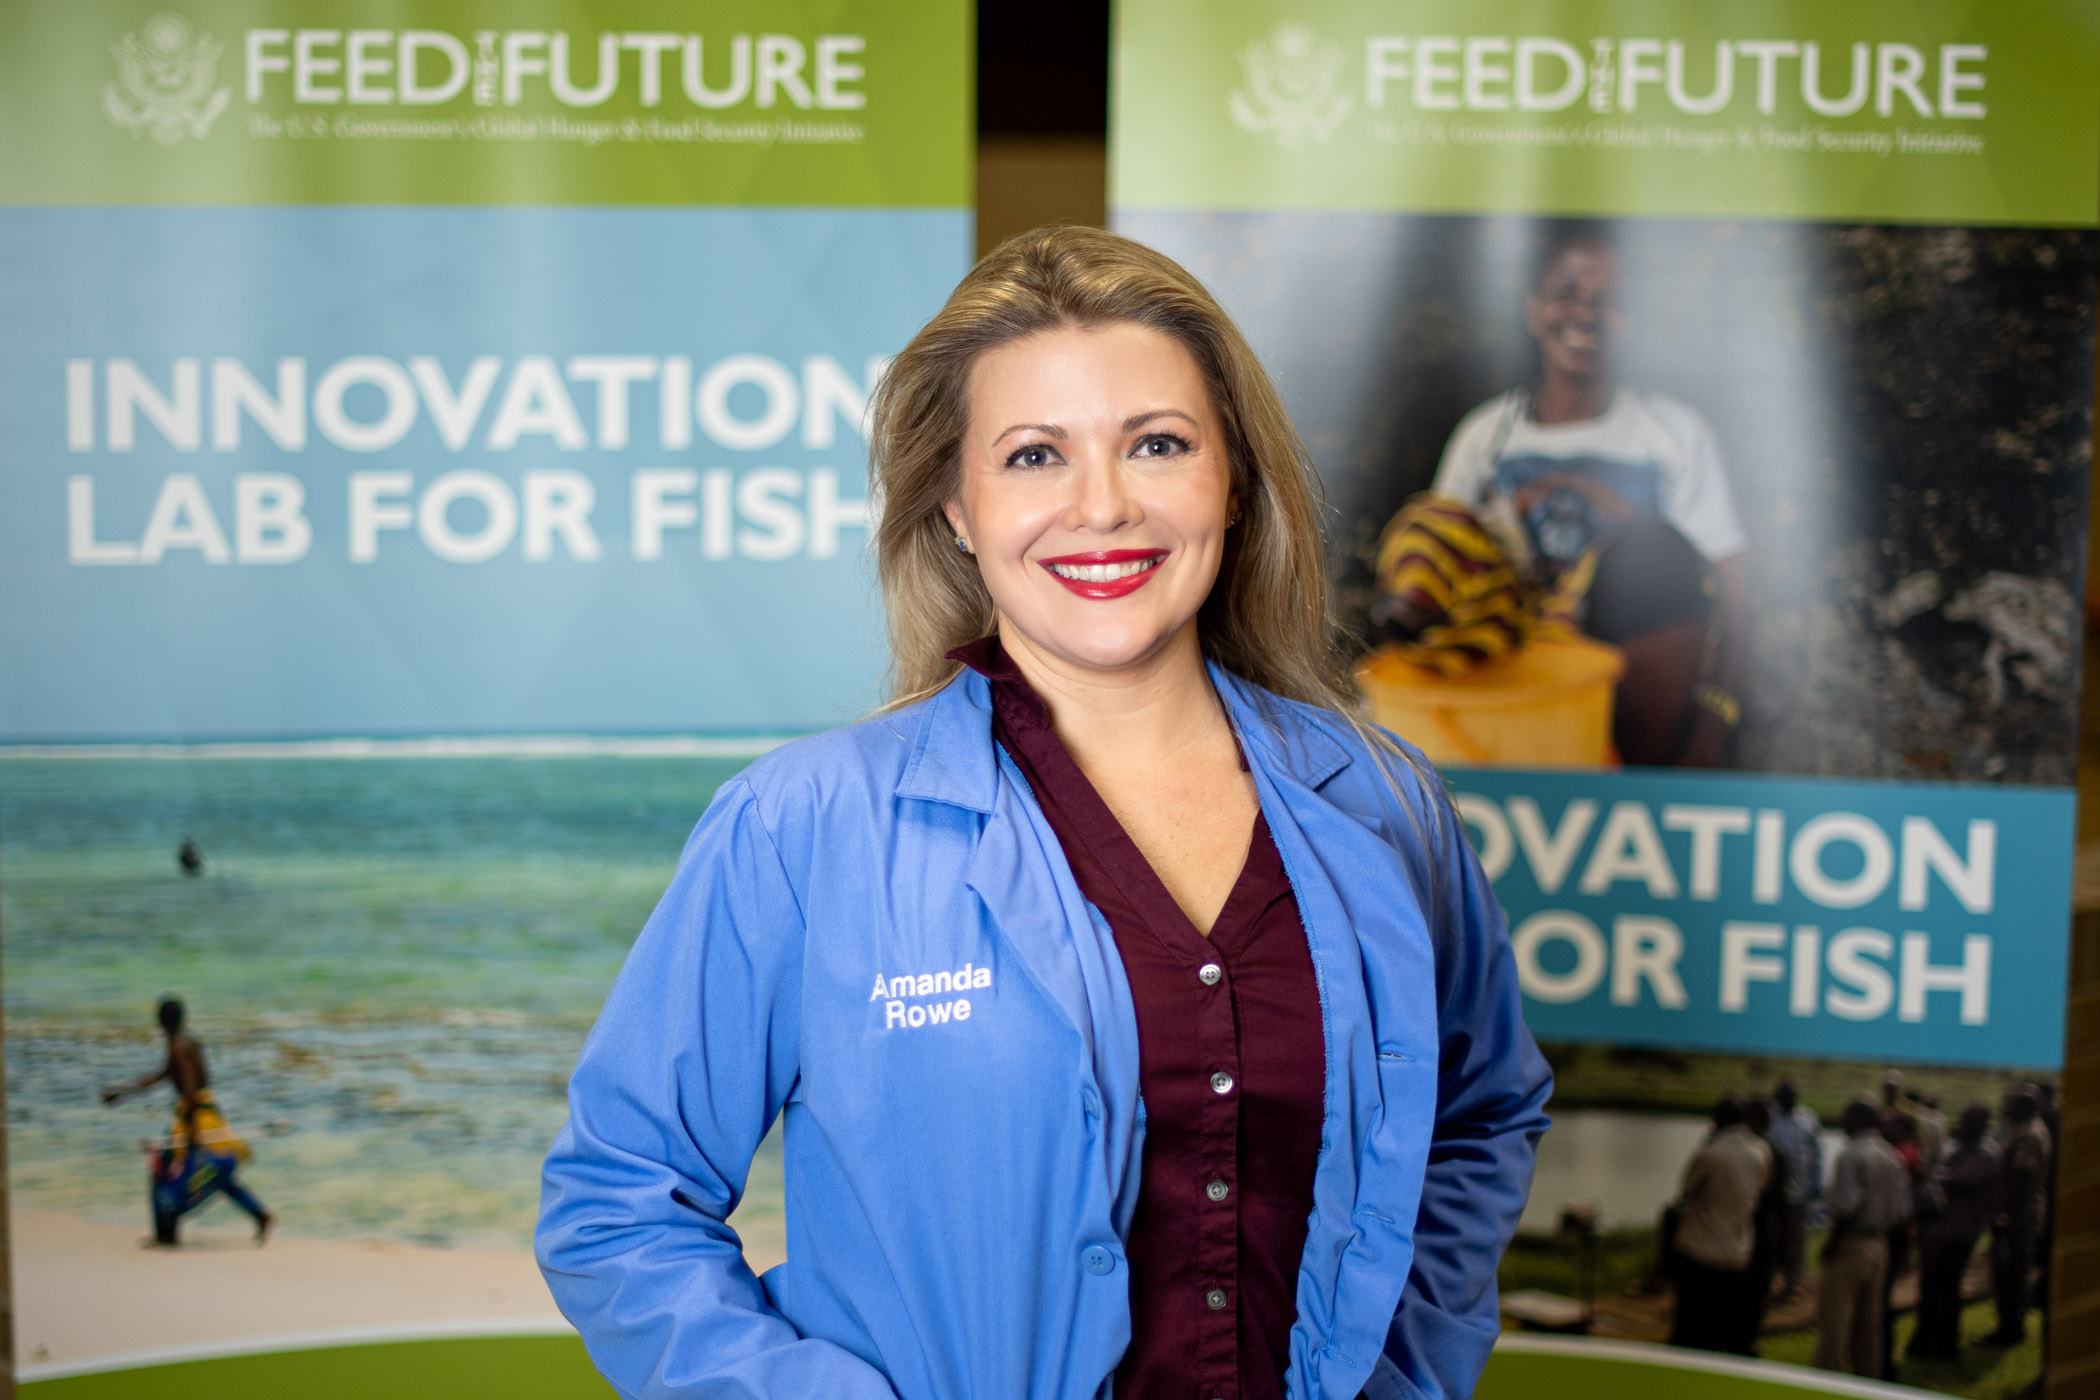 Amanda Rowe, picture outside the Feed the Future Innovation Lab for Fish